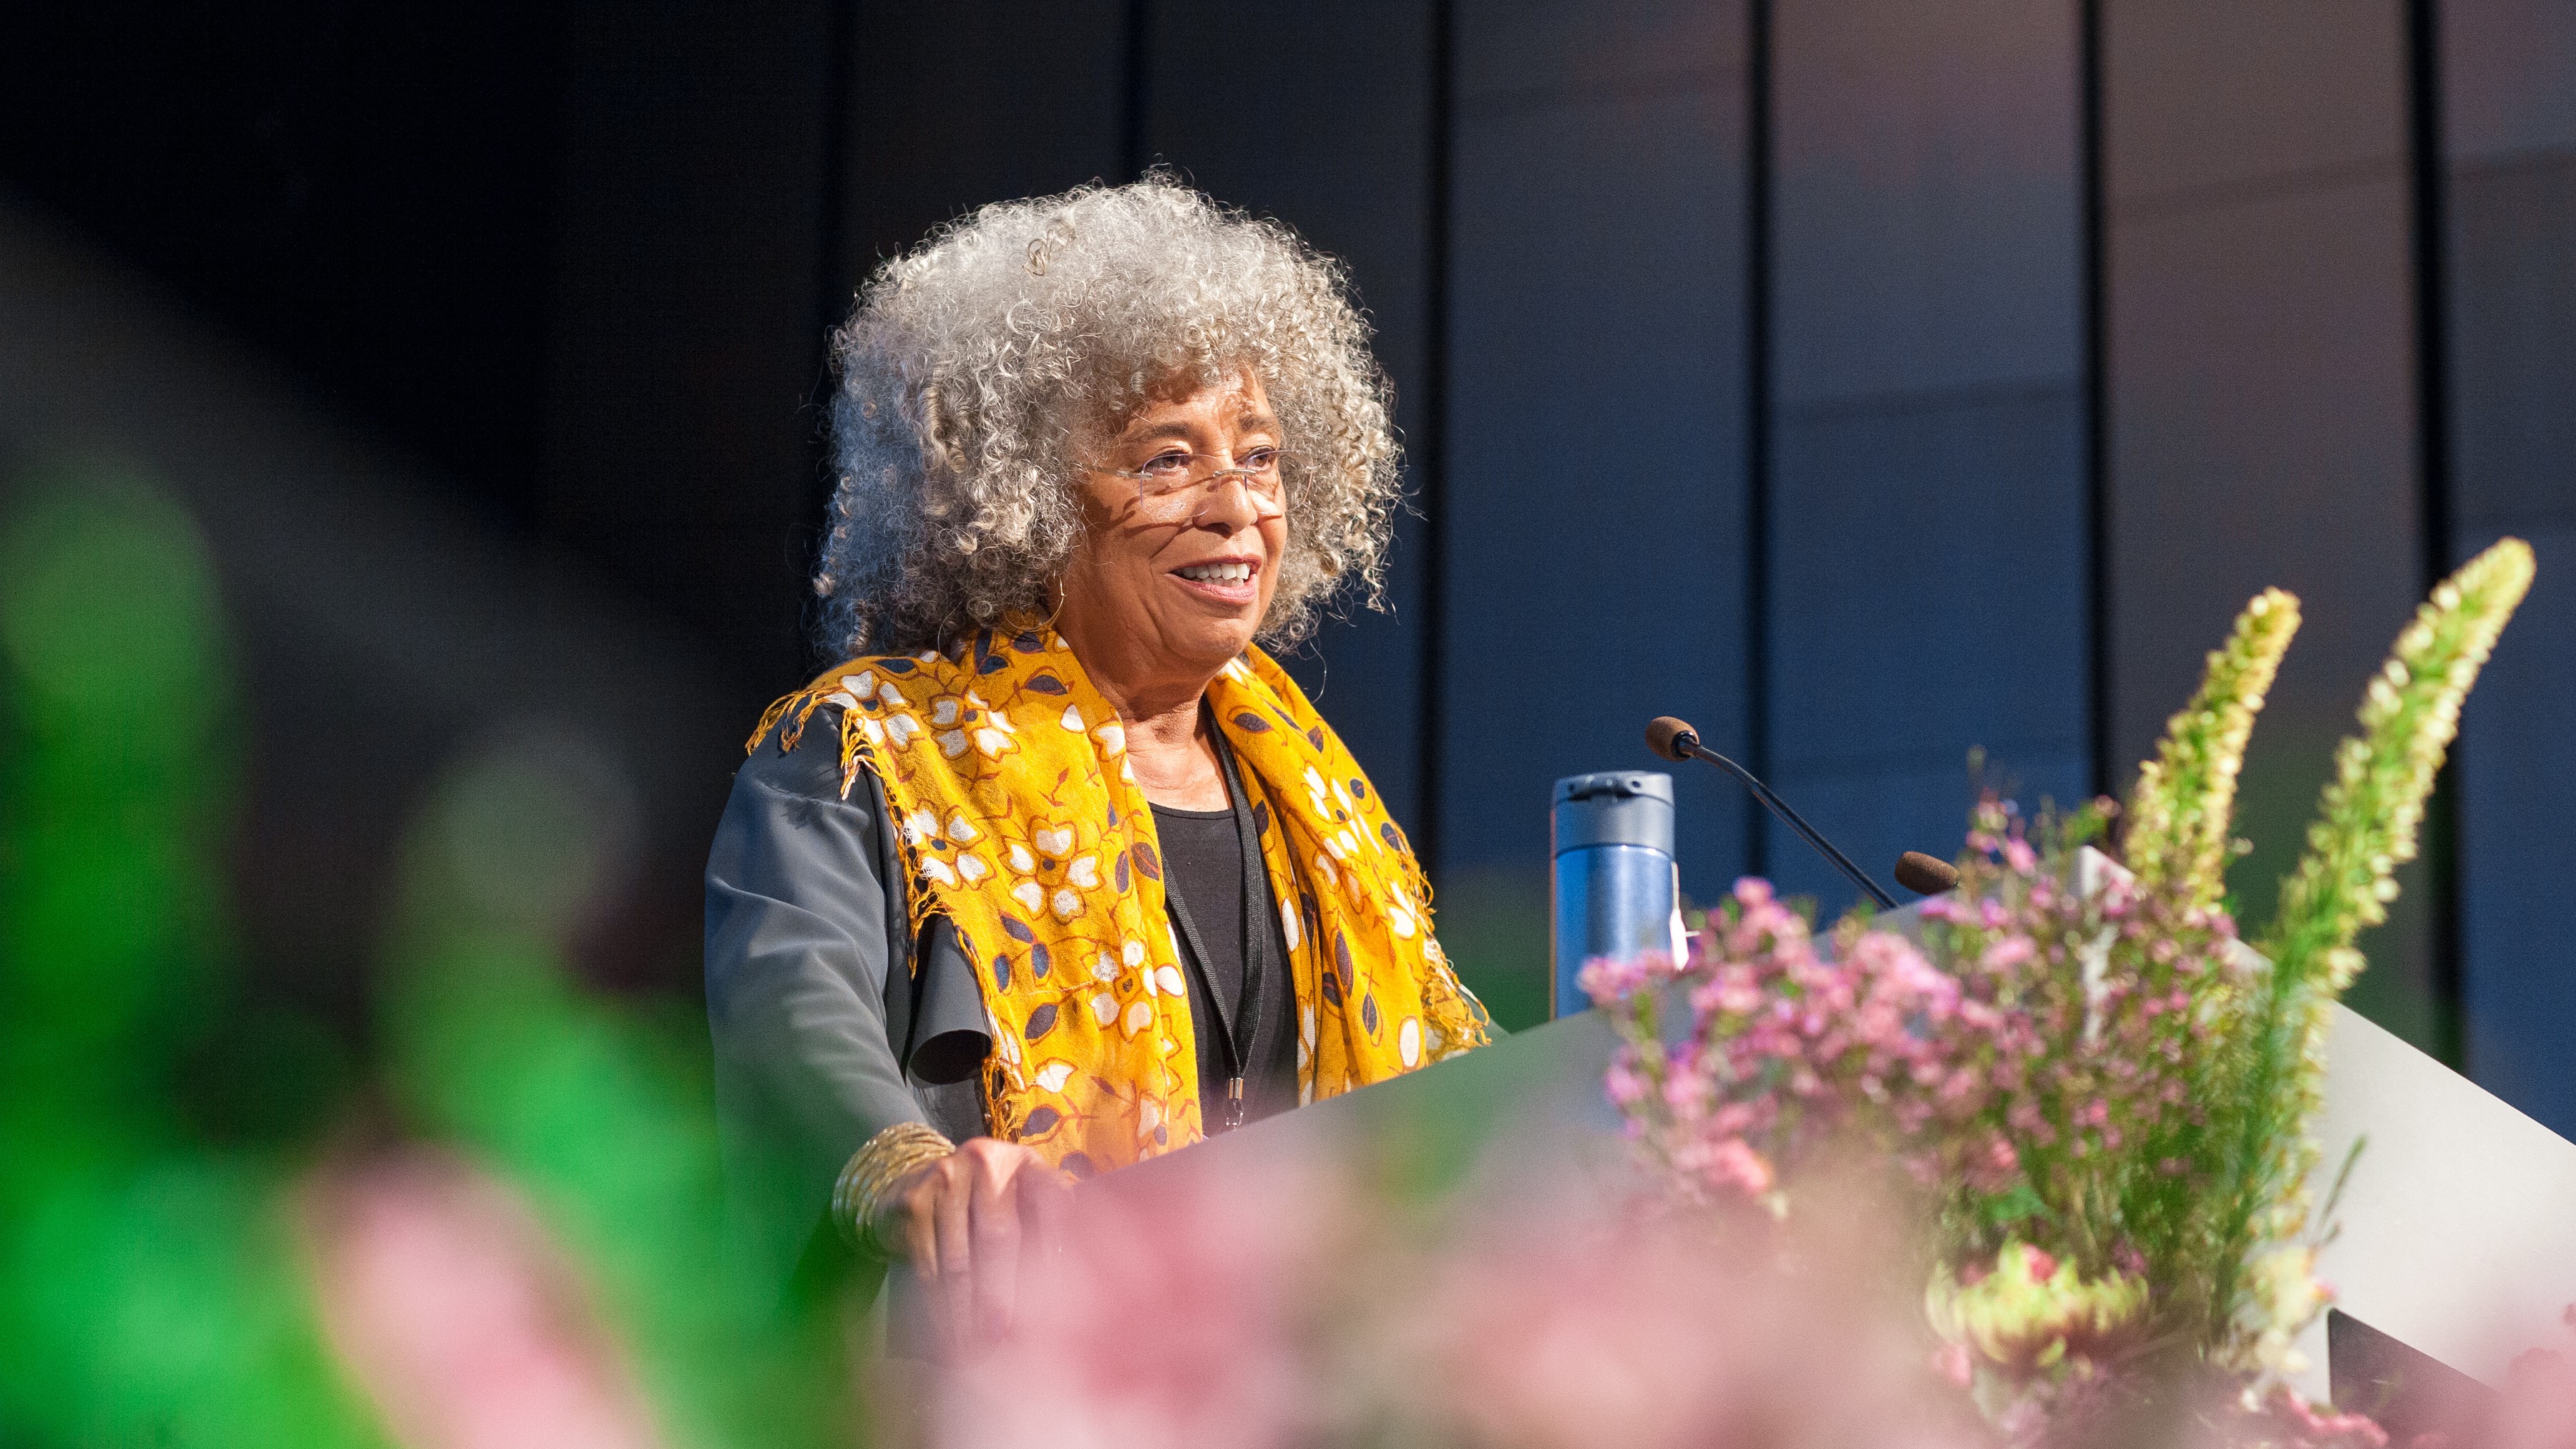 Angela Davis in Reykjavik: We must see the structural powers that support the violence